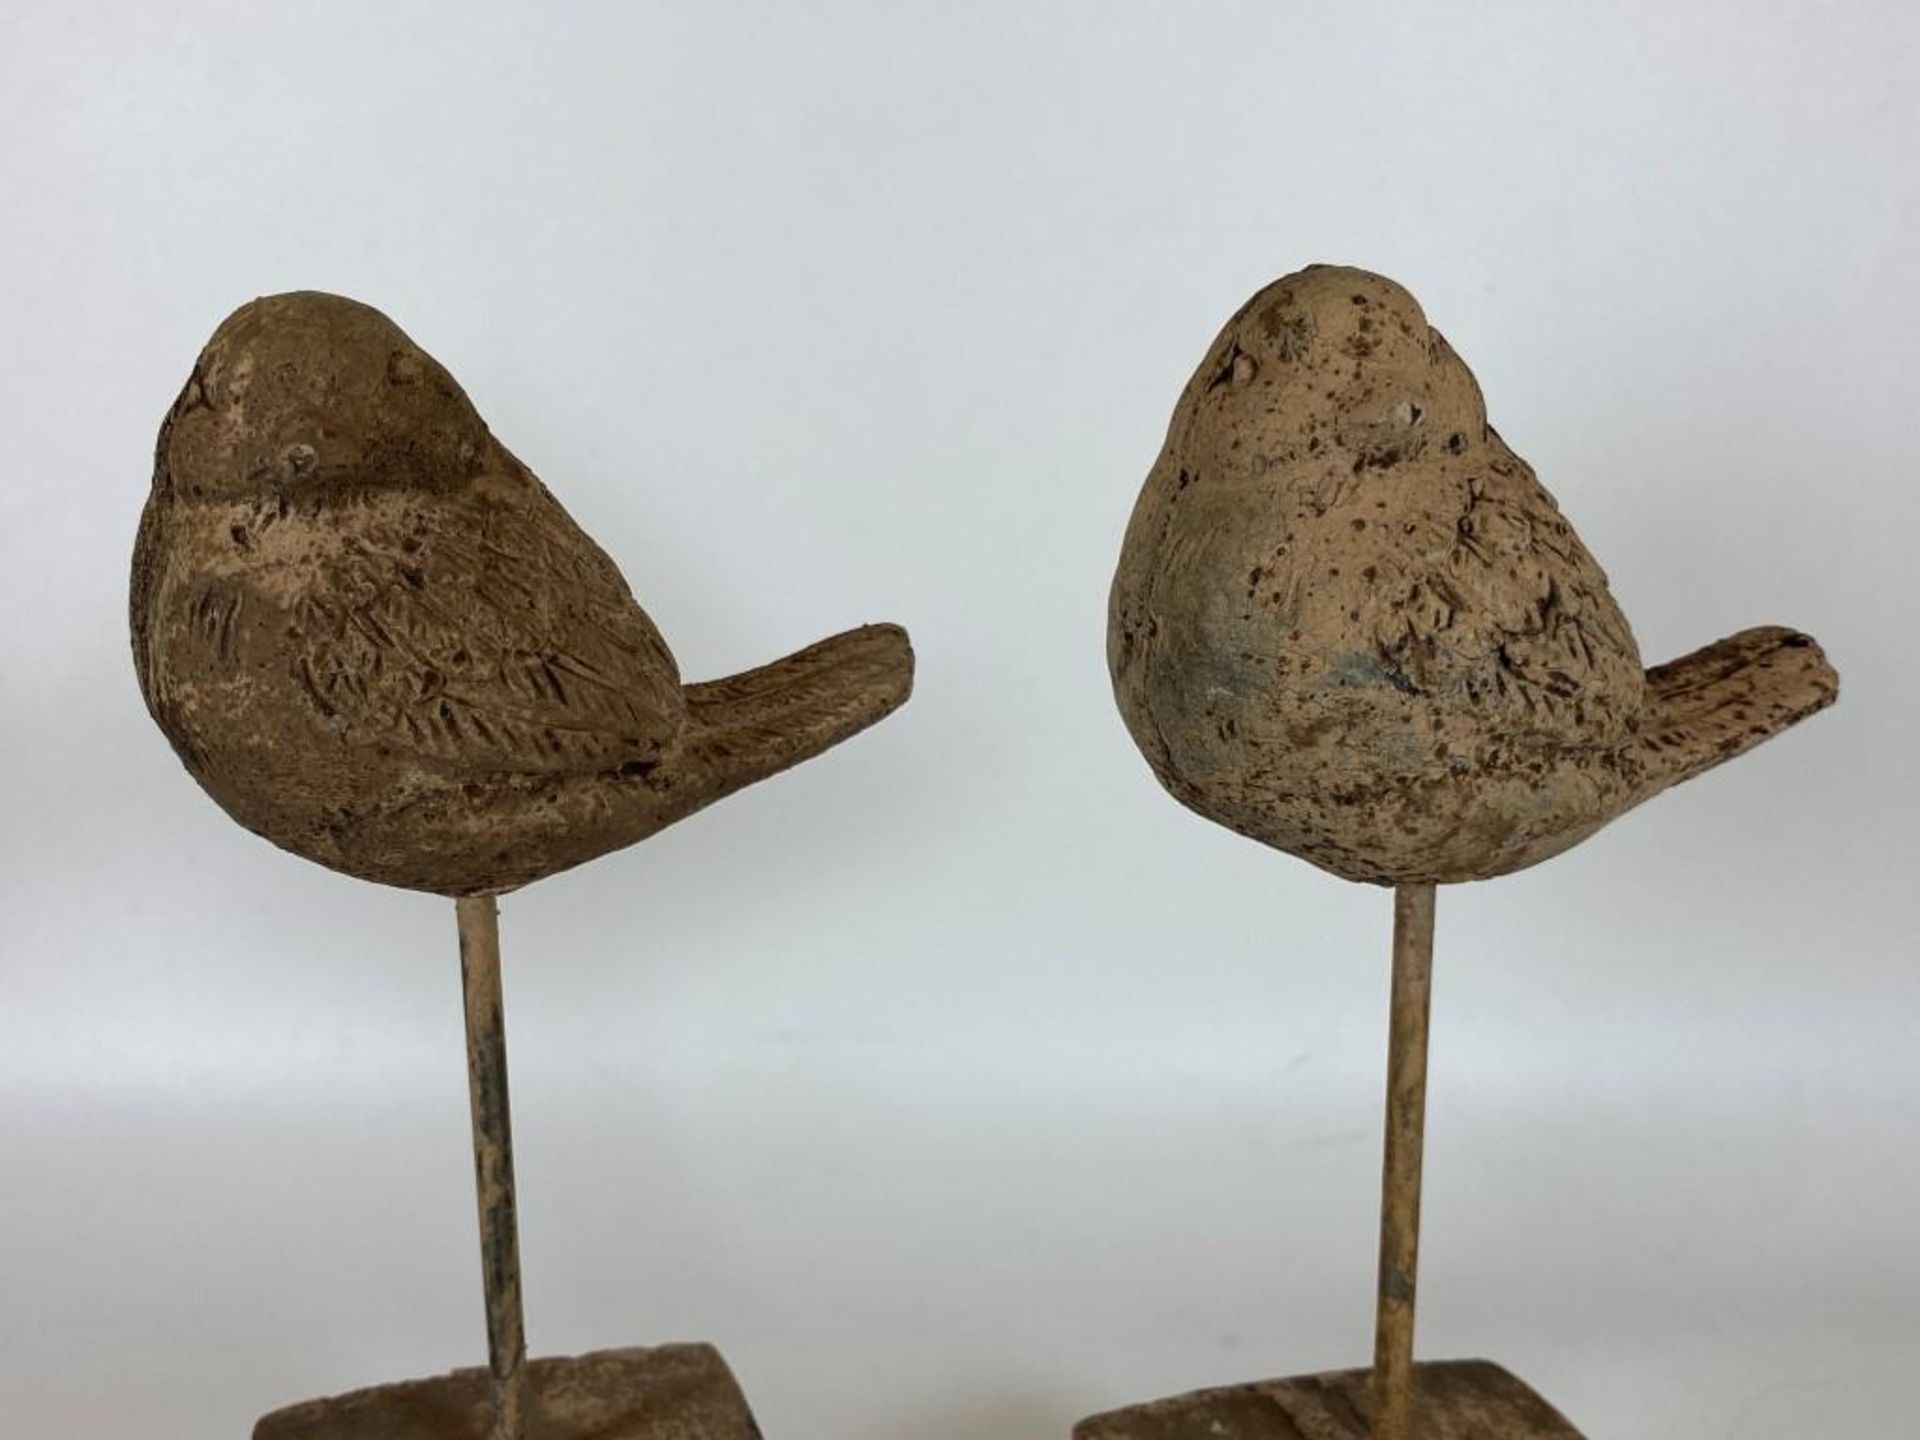 A PAIR OF DECORATIVE STONE BIRD FIGURES ON BASES, HEIGHT 16.5CM - Image 3 of 7